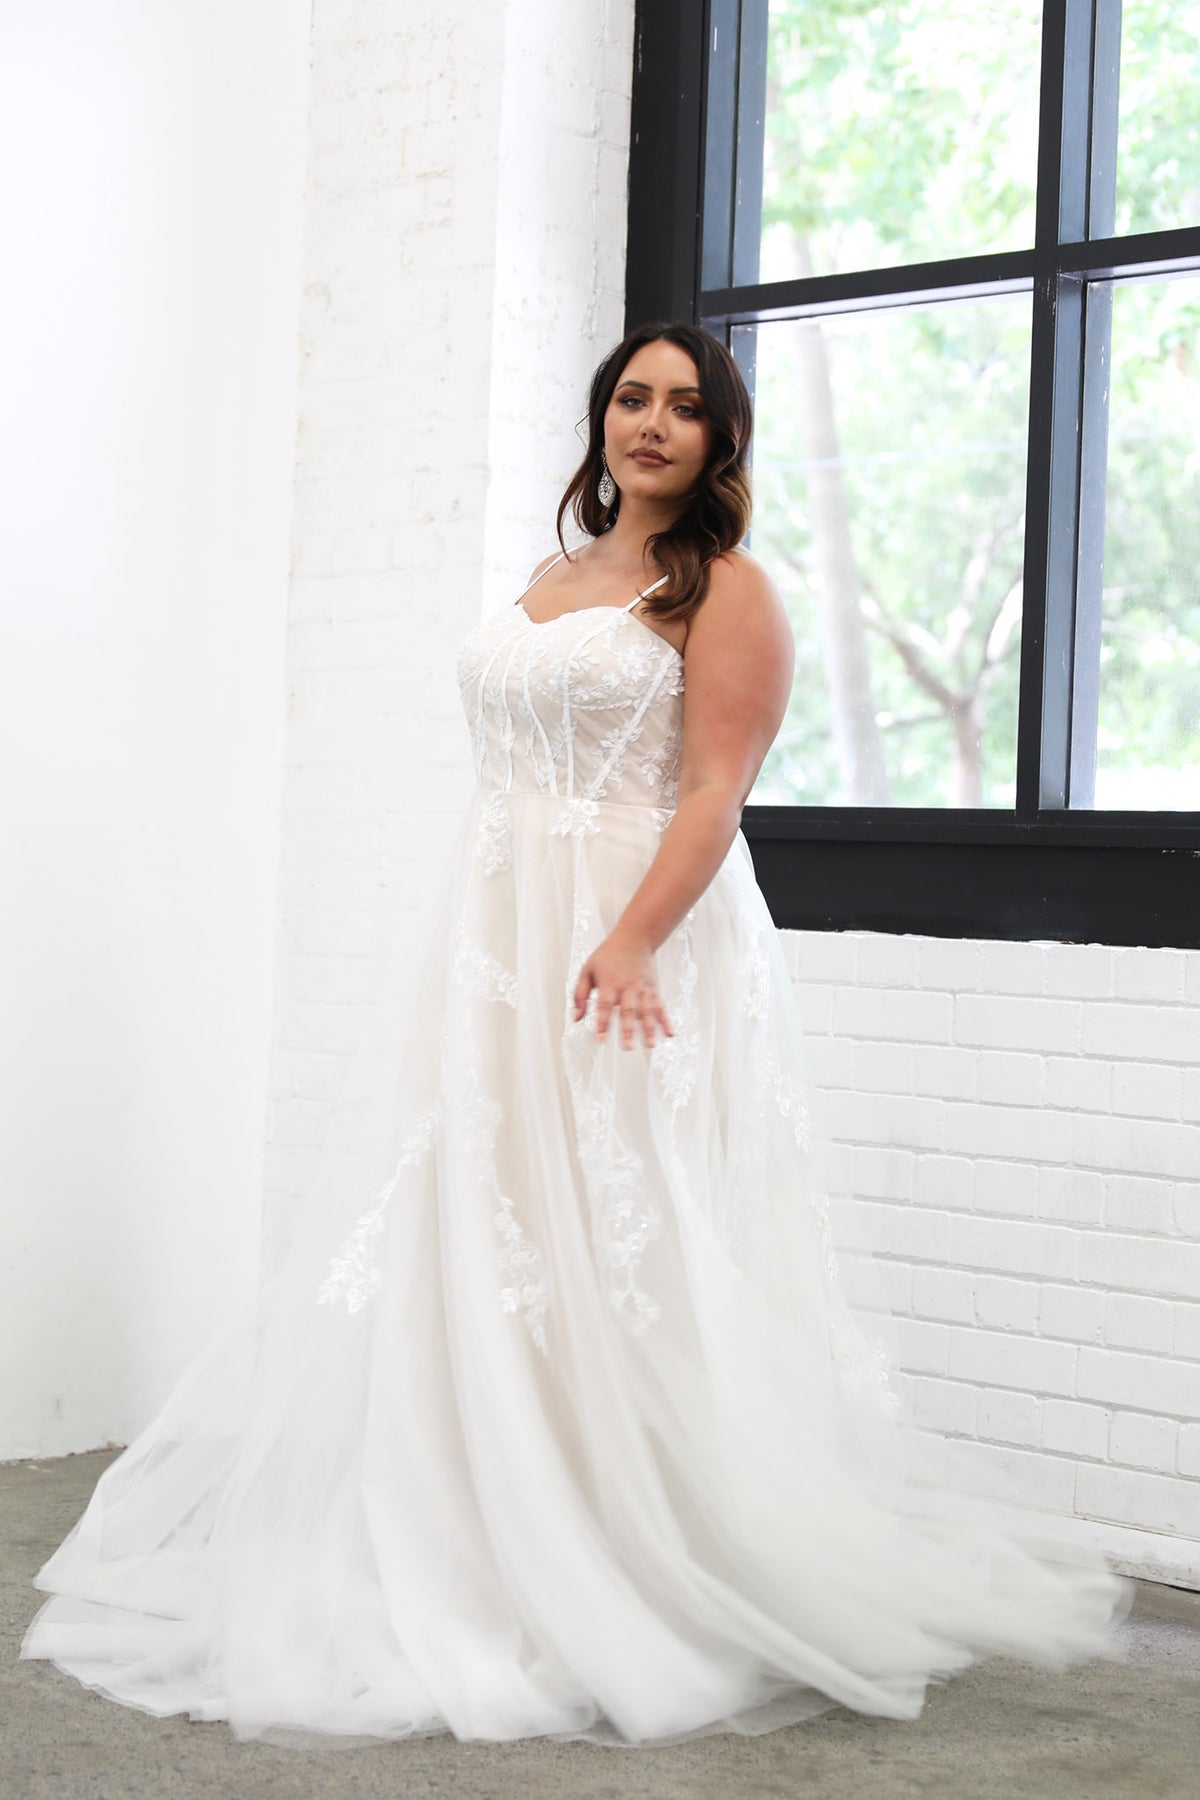 Plus Size Bride wearing Ivory Off White Lace A-line Wedding Gown with Floral and Vine-like Lace Motifs Embellished on Layered Tulle